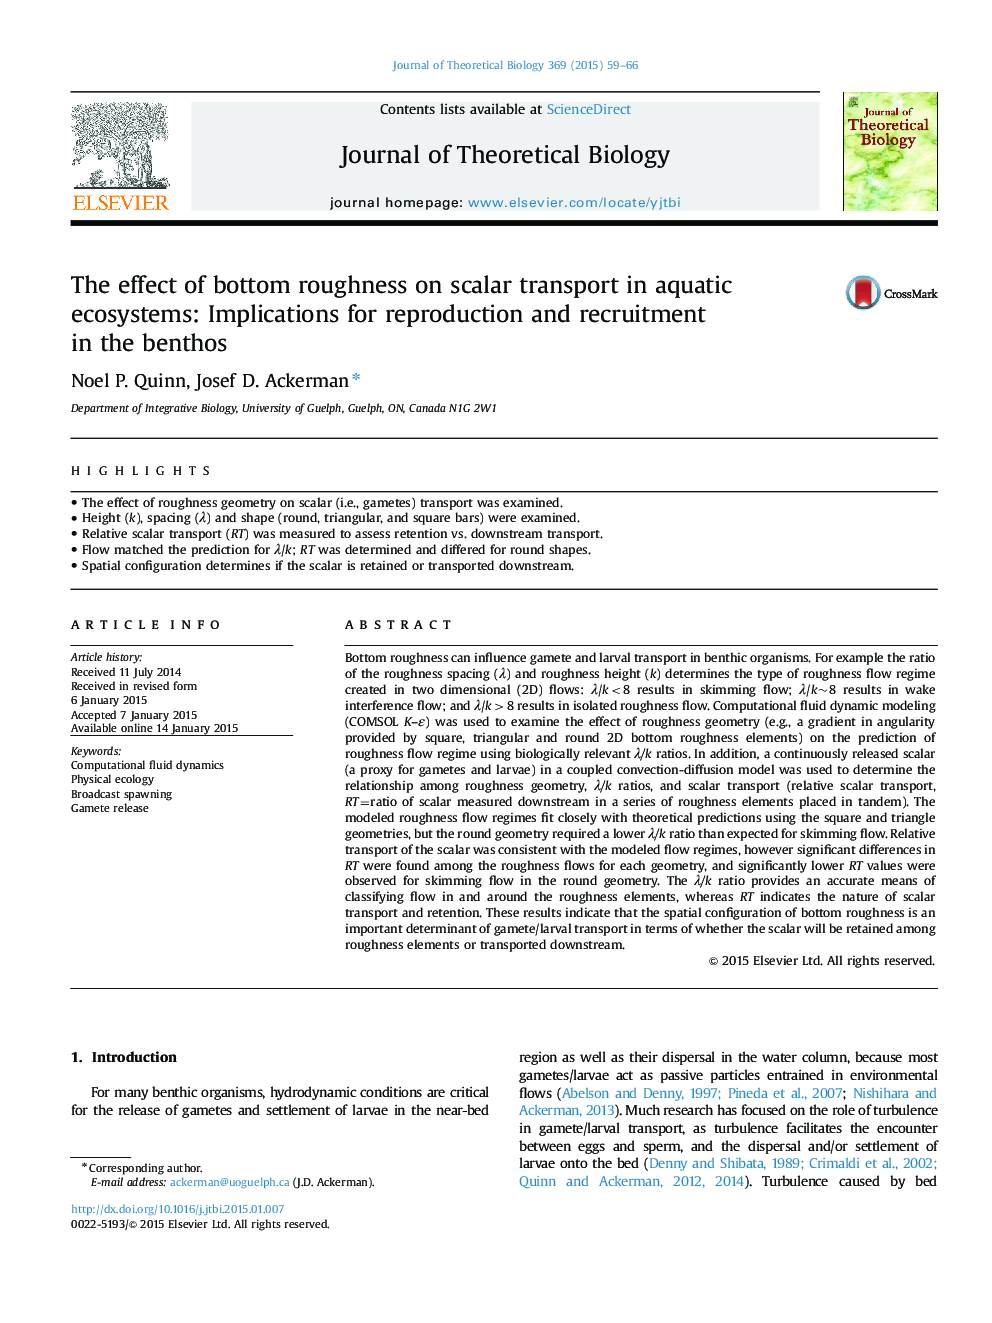 The effect of bottom roughness on scalar transport in aquatic ecosystems: Implications for reproduction and recruitment in the benthos